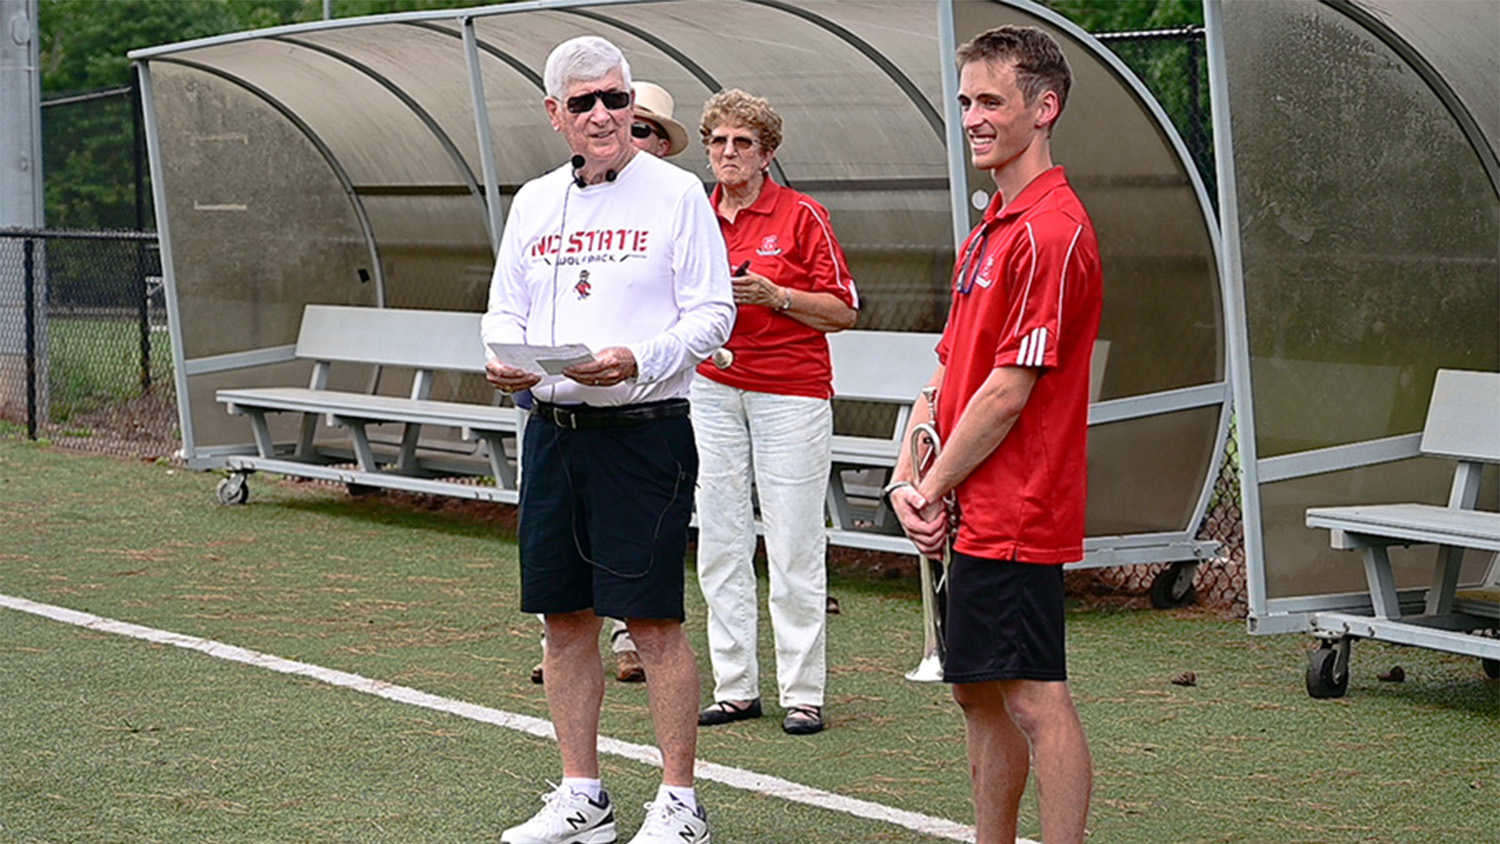 Gage Fringer, wearing a red shirt and black shorts and holding his trumpet, standing next to a man (Bob Masini) in a white shirt and black shorts